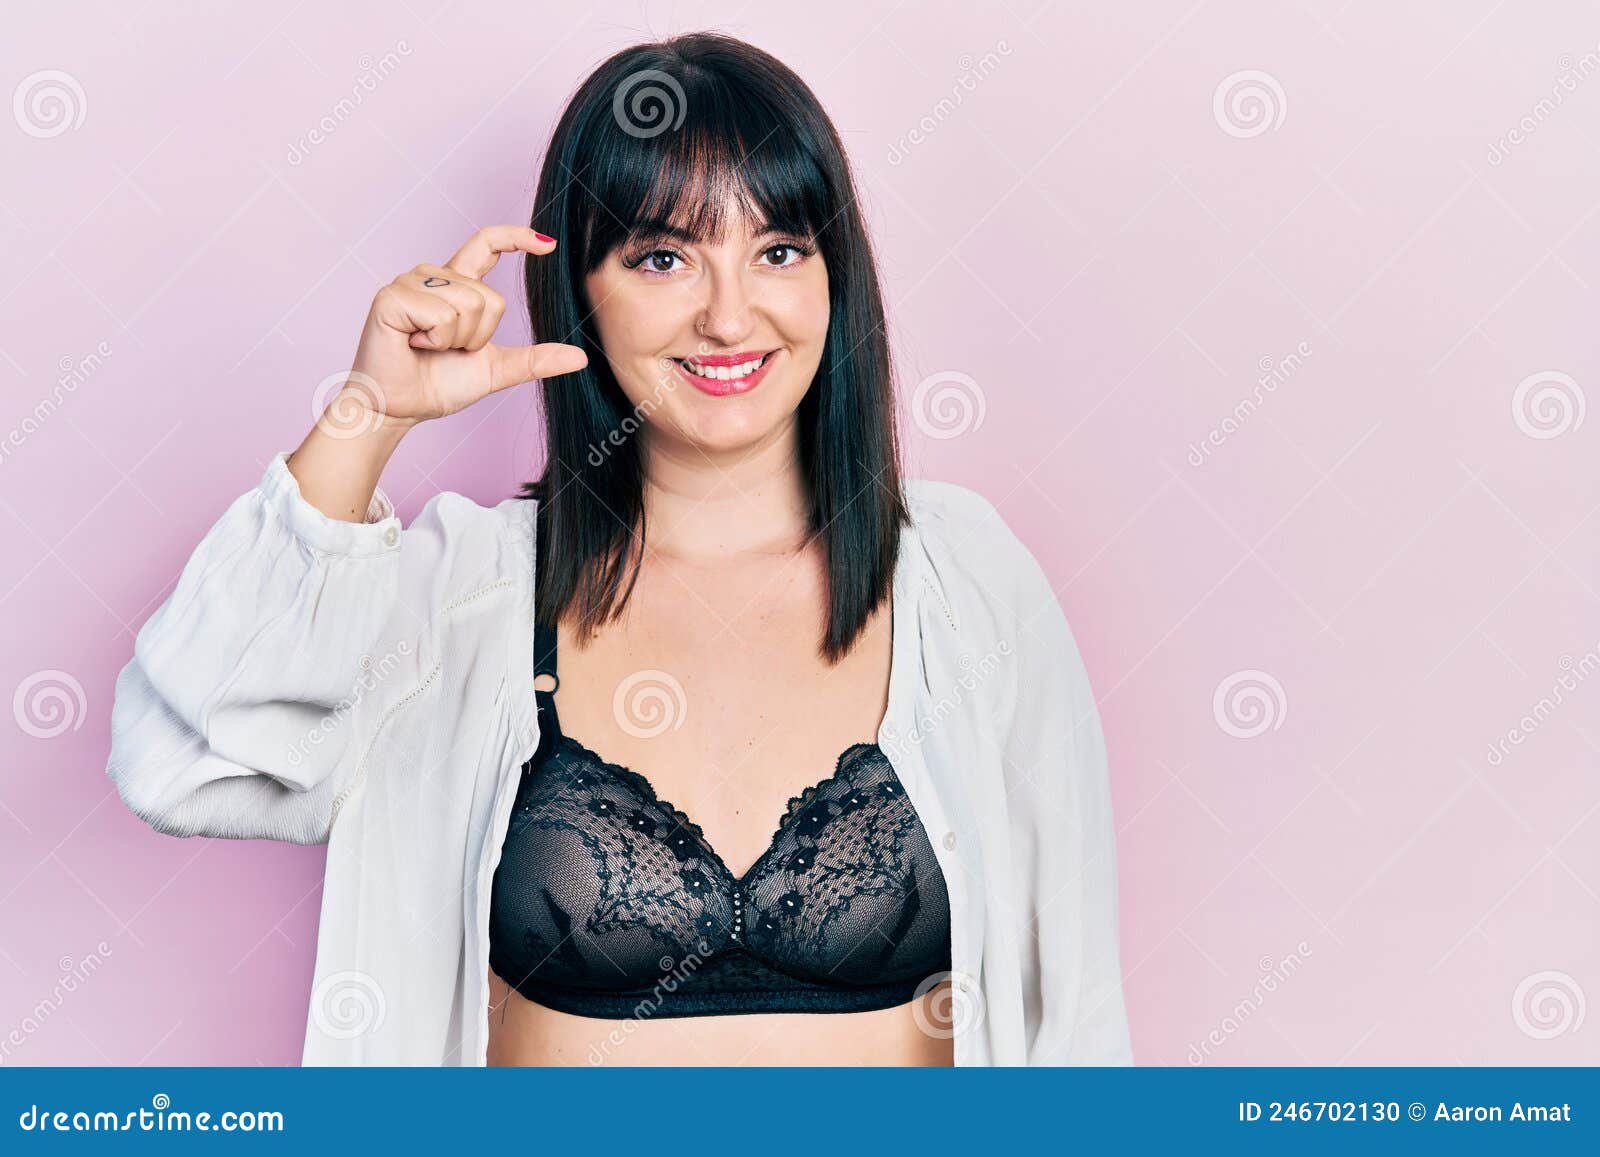 Plus Size Girl With Big Breast Measuring Free Stock Photo and Image  359789520